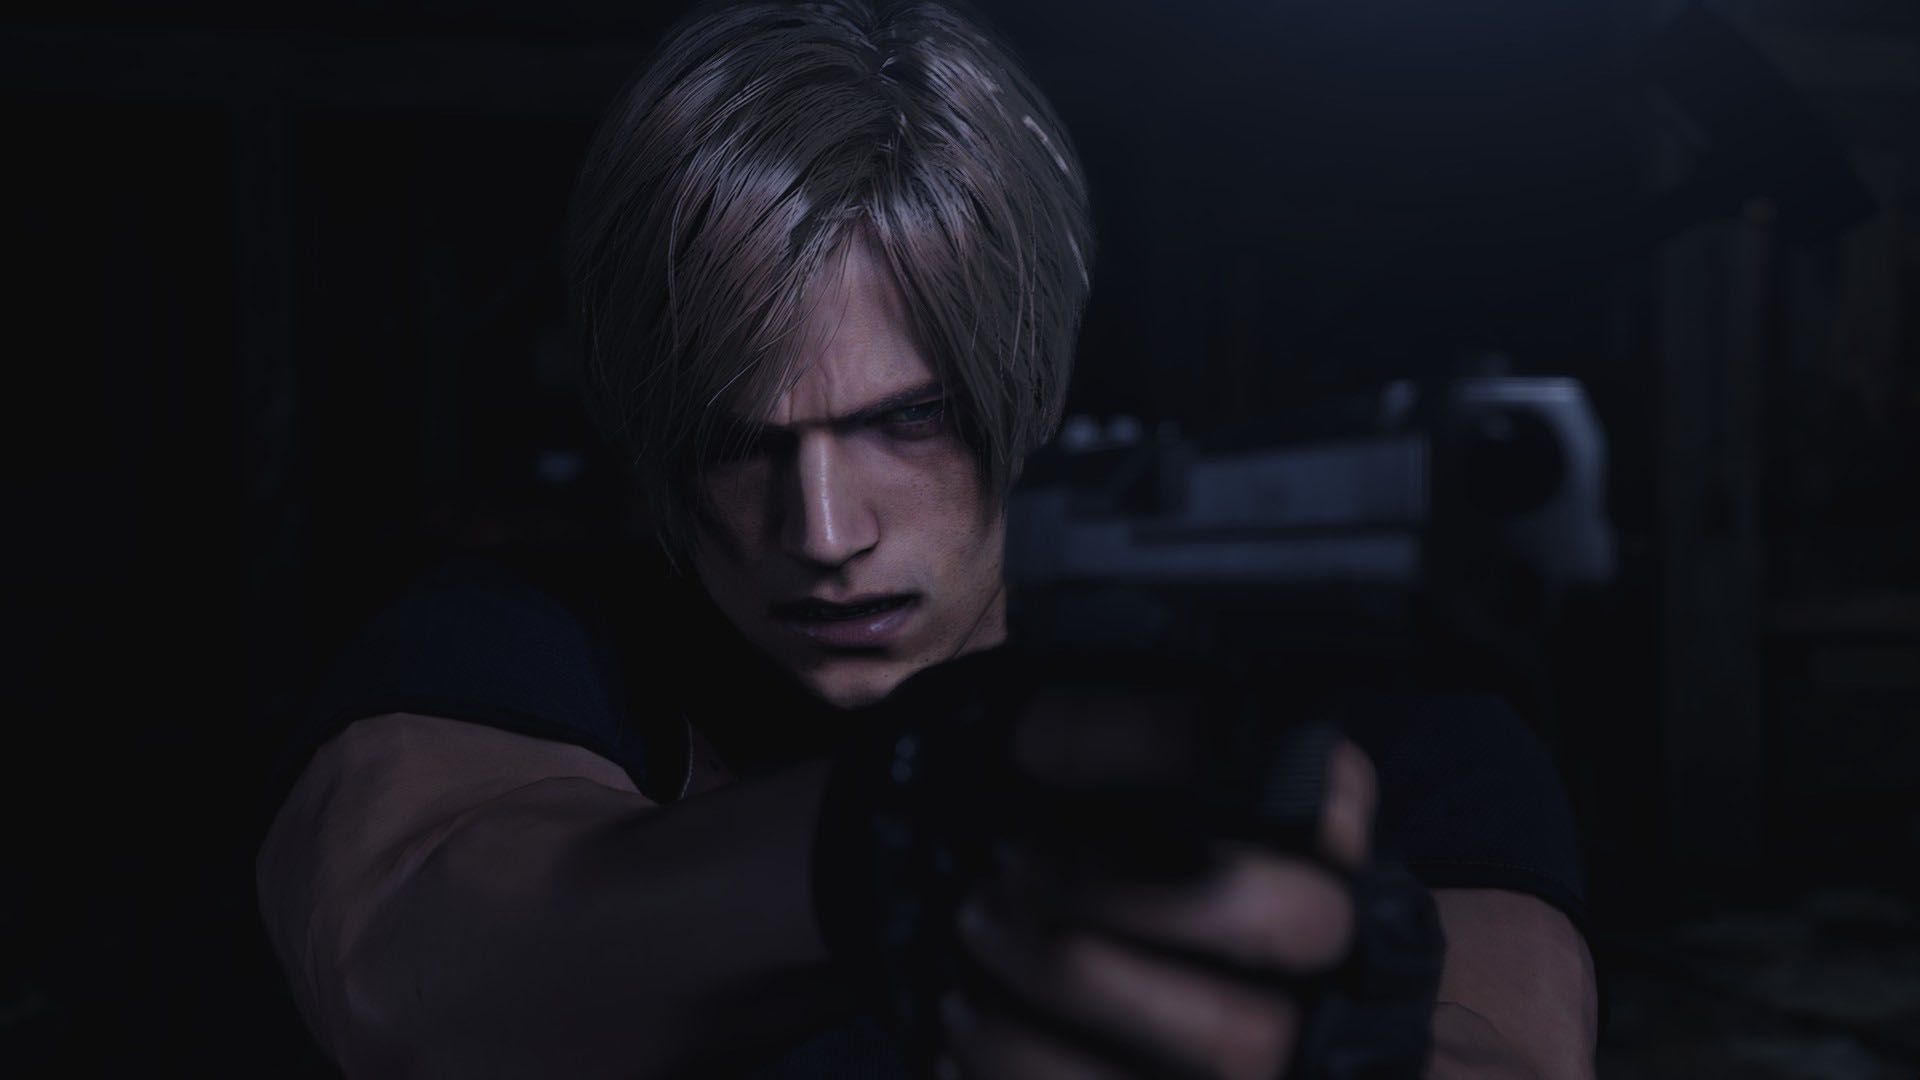 Resident Evil 4 remake: every console version tested